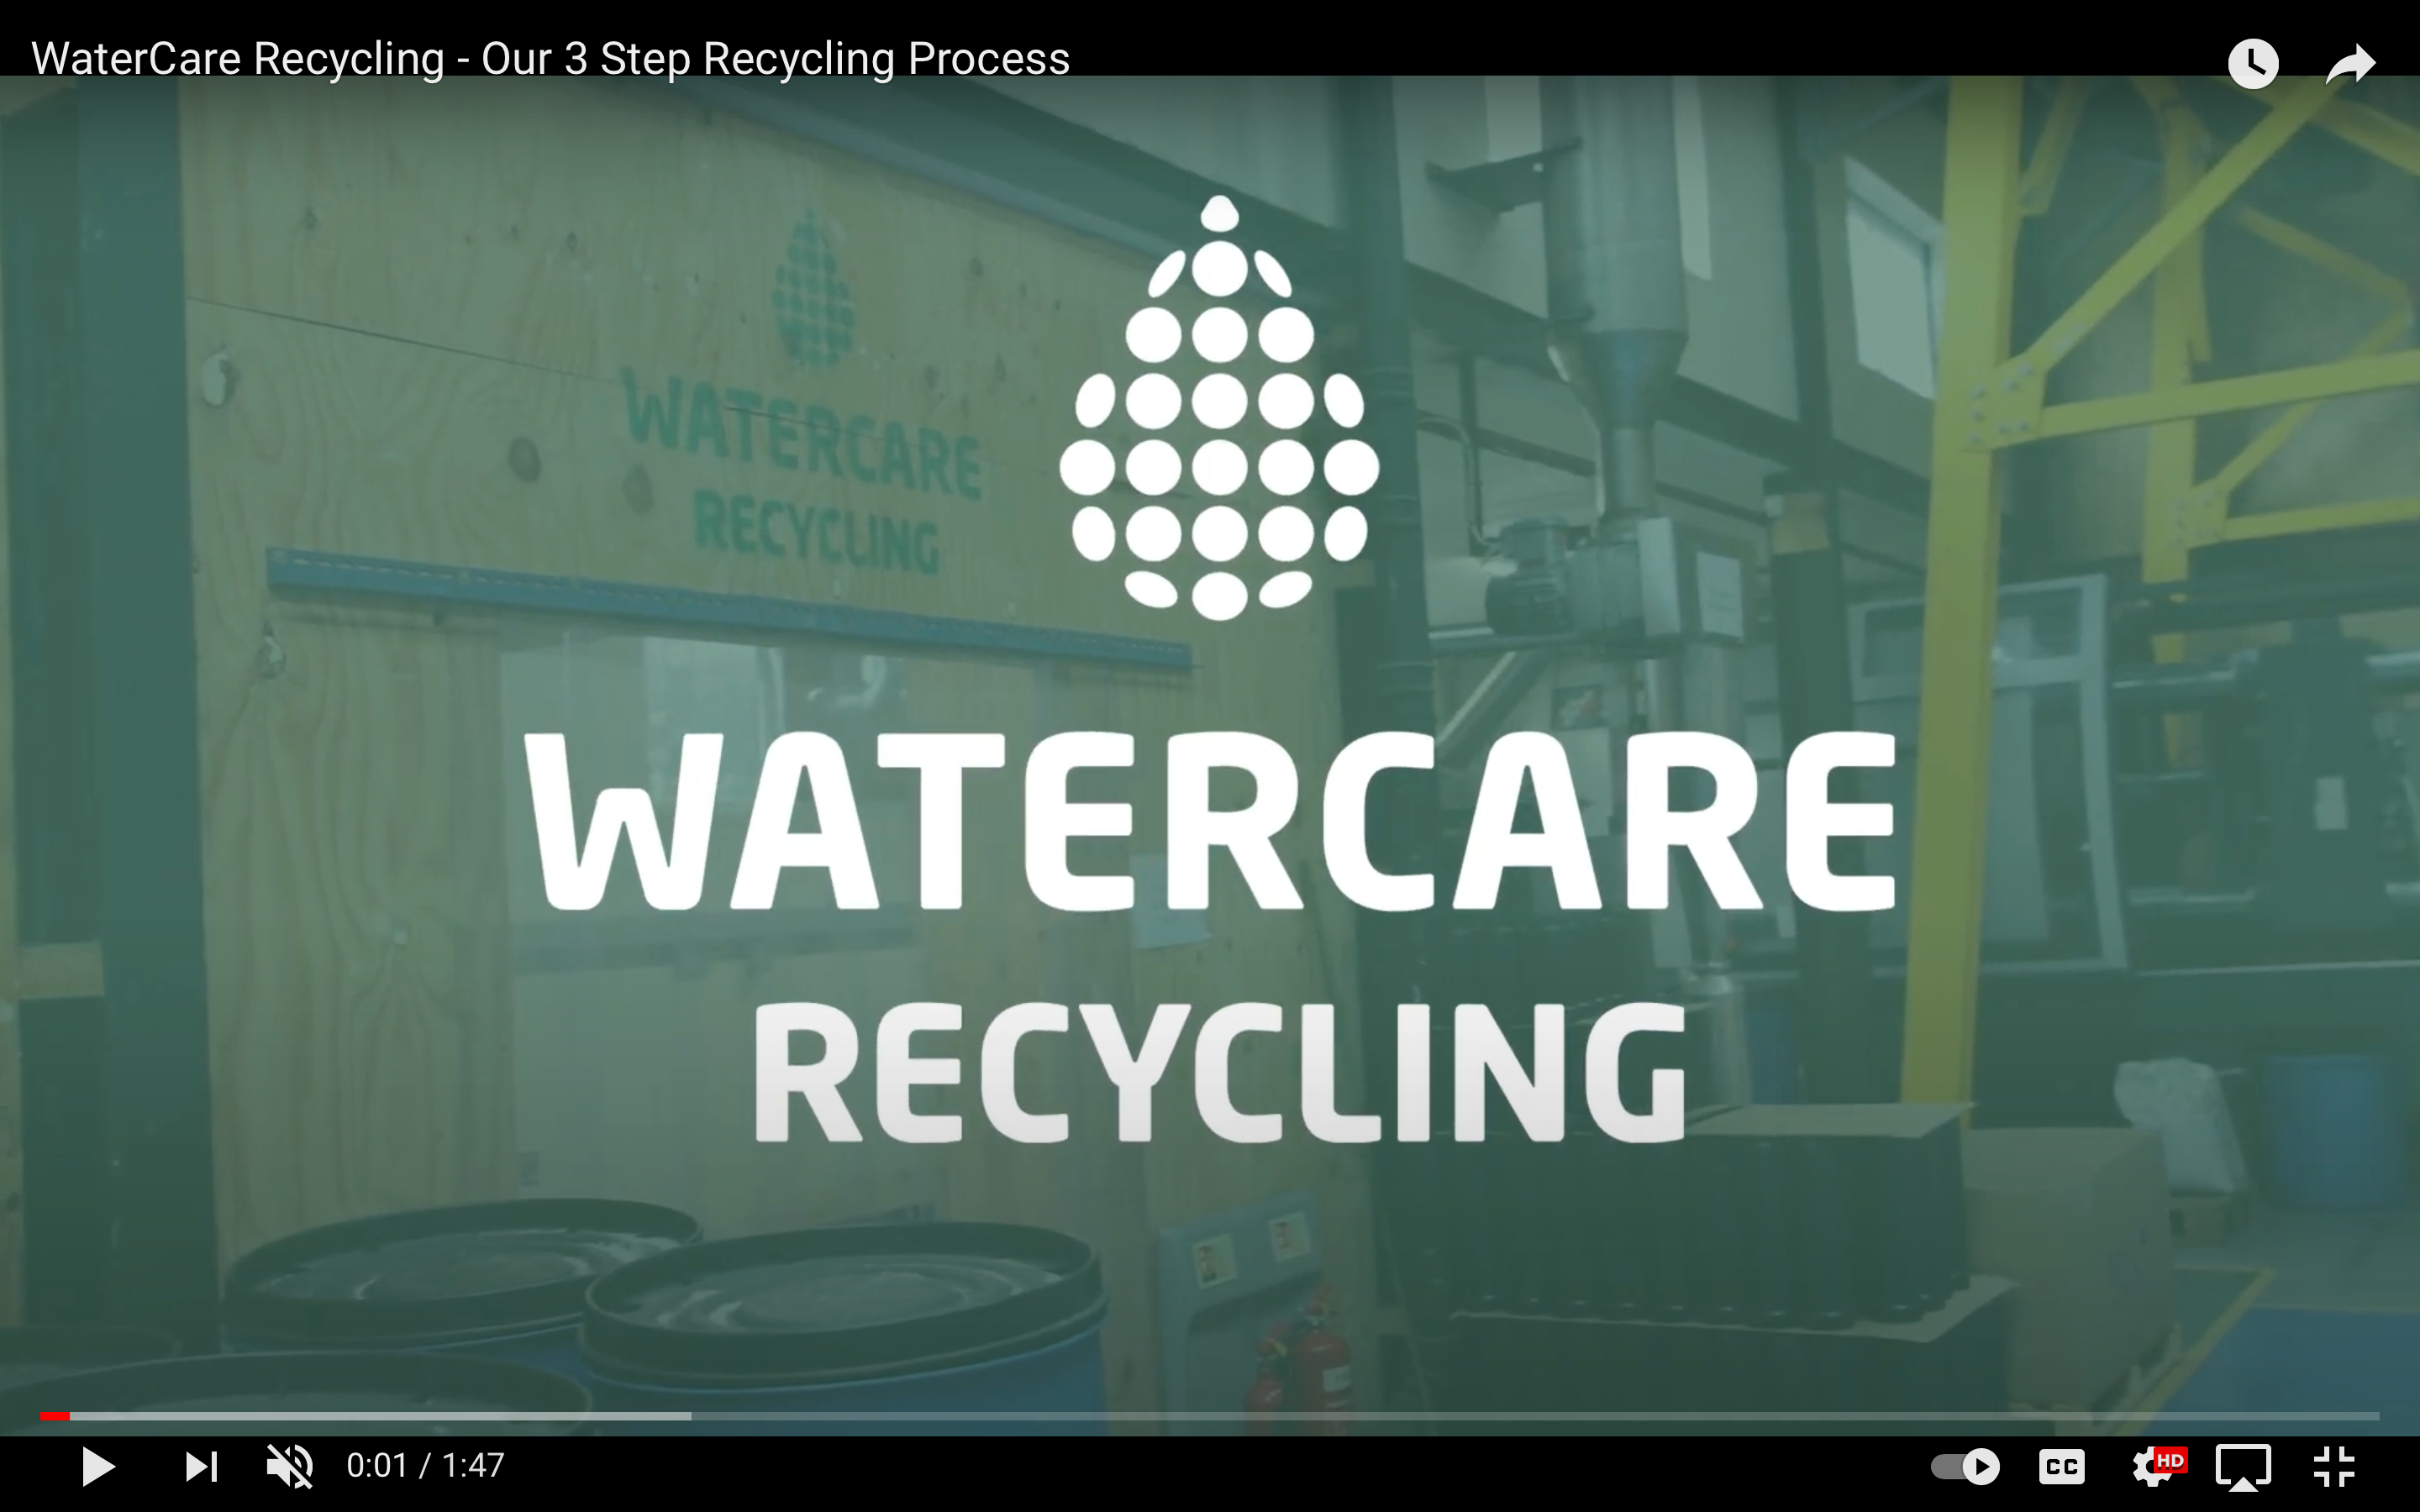 WaterCare Recycling